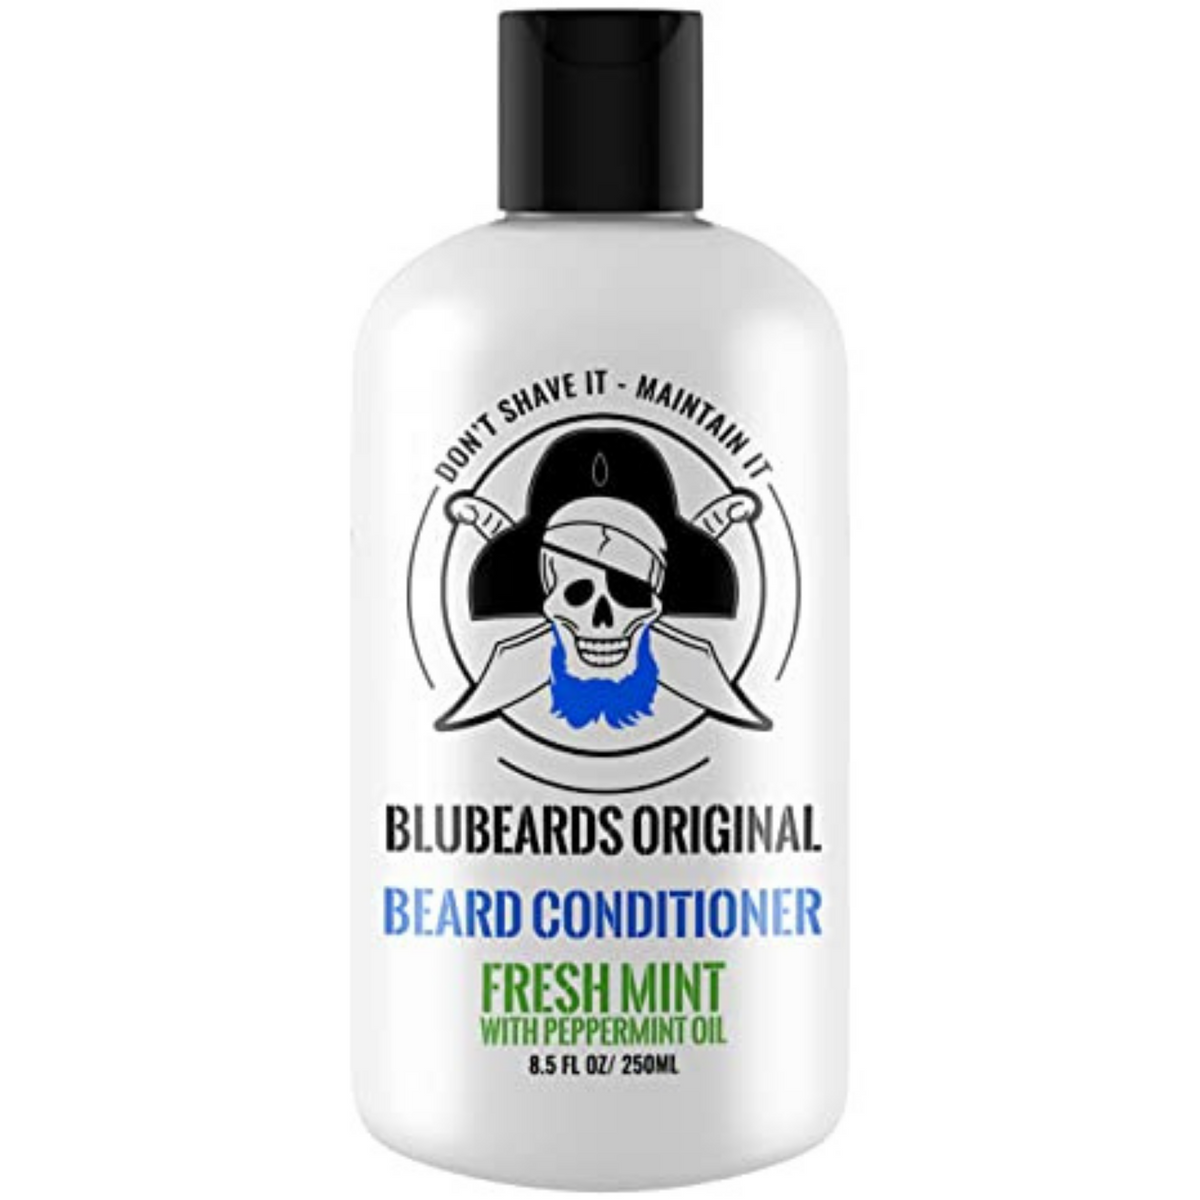 Primary image of Fresh Mint Beard Conditioner